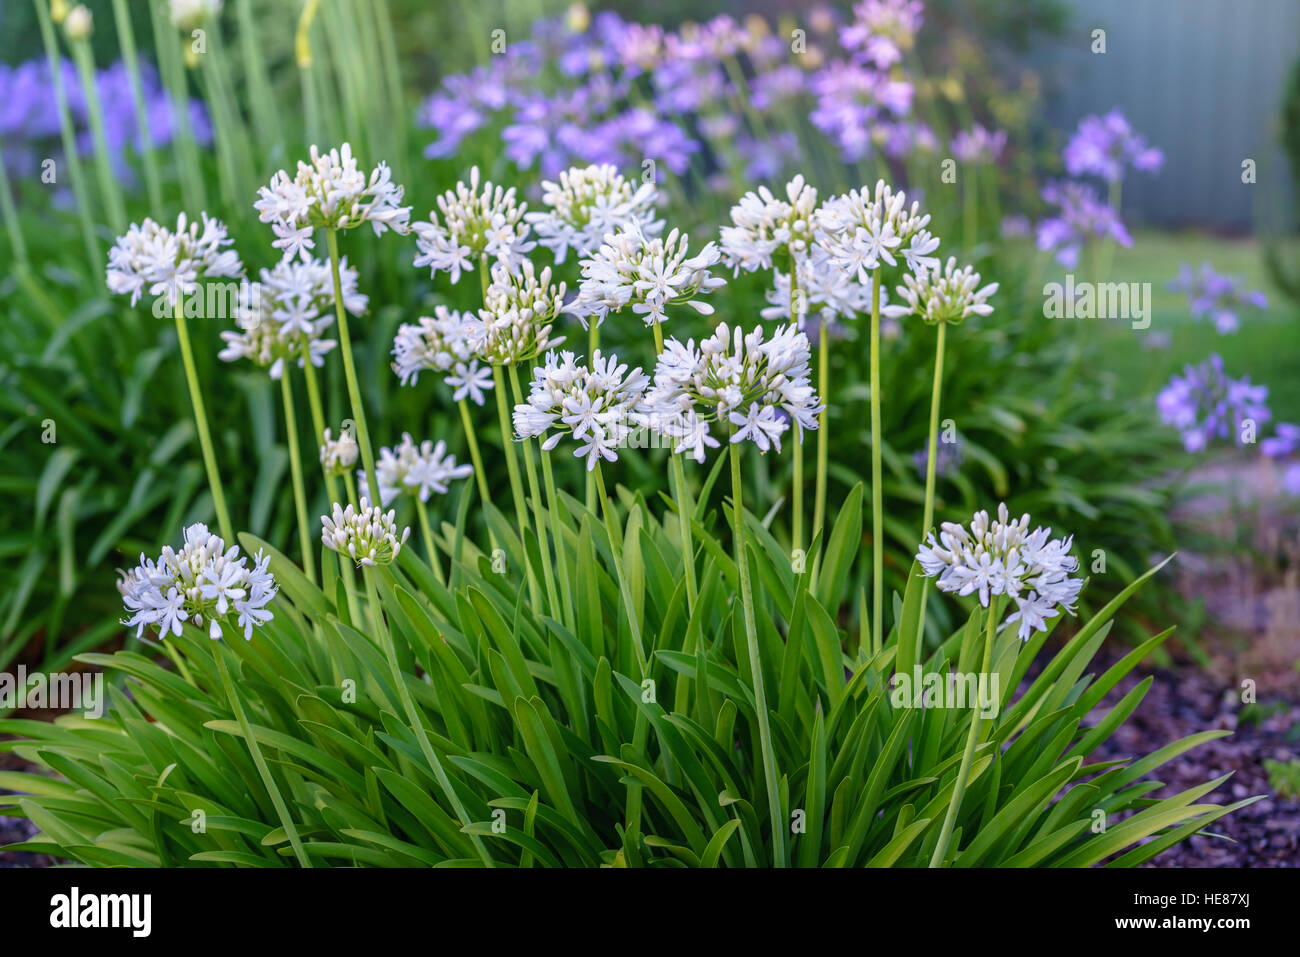 African blue lily Agapanthus africanus flowers against a garden background.  White and purple flowers. Stock Photo